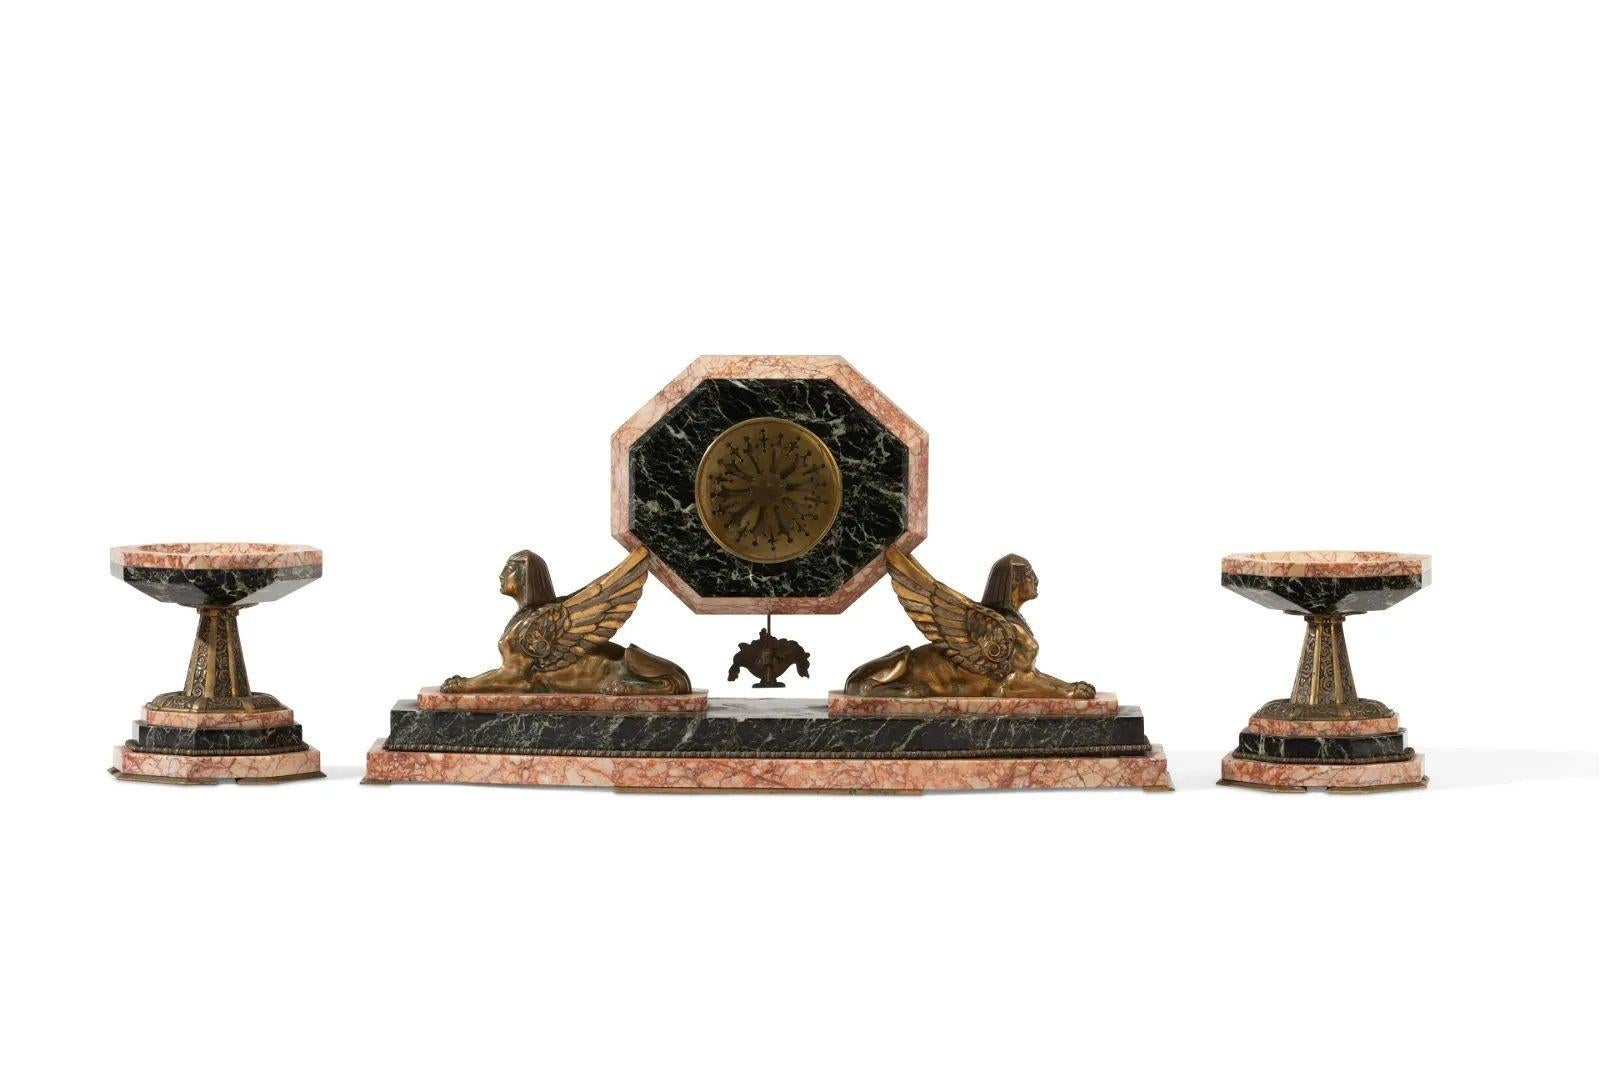 An Art Deco Egyptian Revival clock set
Early 20th century; France
Metal dial with black Arabic numerals set in a two-tone marble case flanked by bronze sphinxes, with matching compotes
3 pieces
Clock: 13